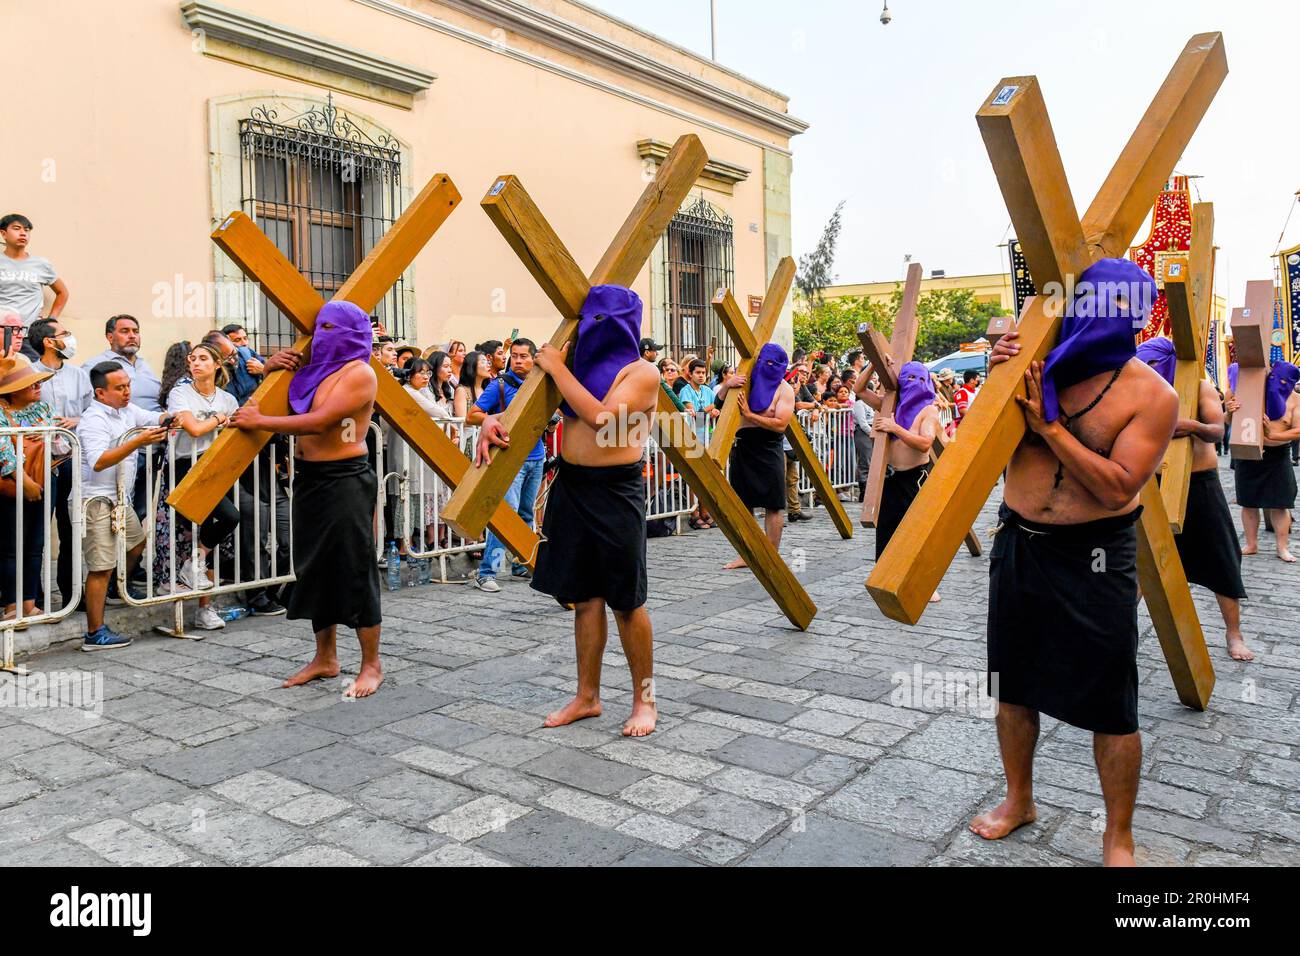 Good Friday Silent procession in Oaxaca Mexico during the Semana Santa  (Easter) / Participants with crosses wear hoods to create anonymity and symbolize equality before God Stock Photo